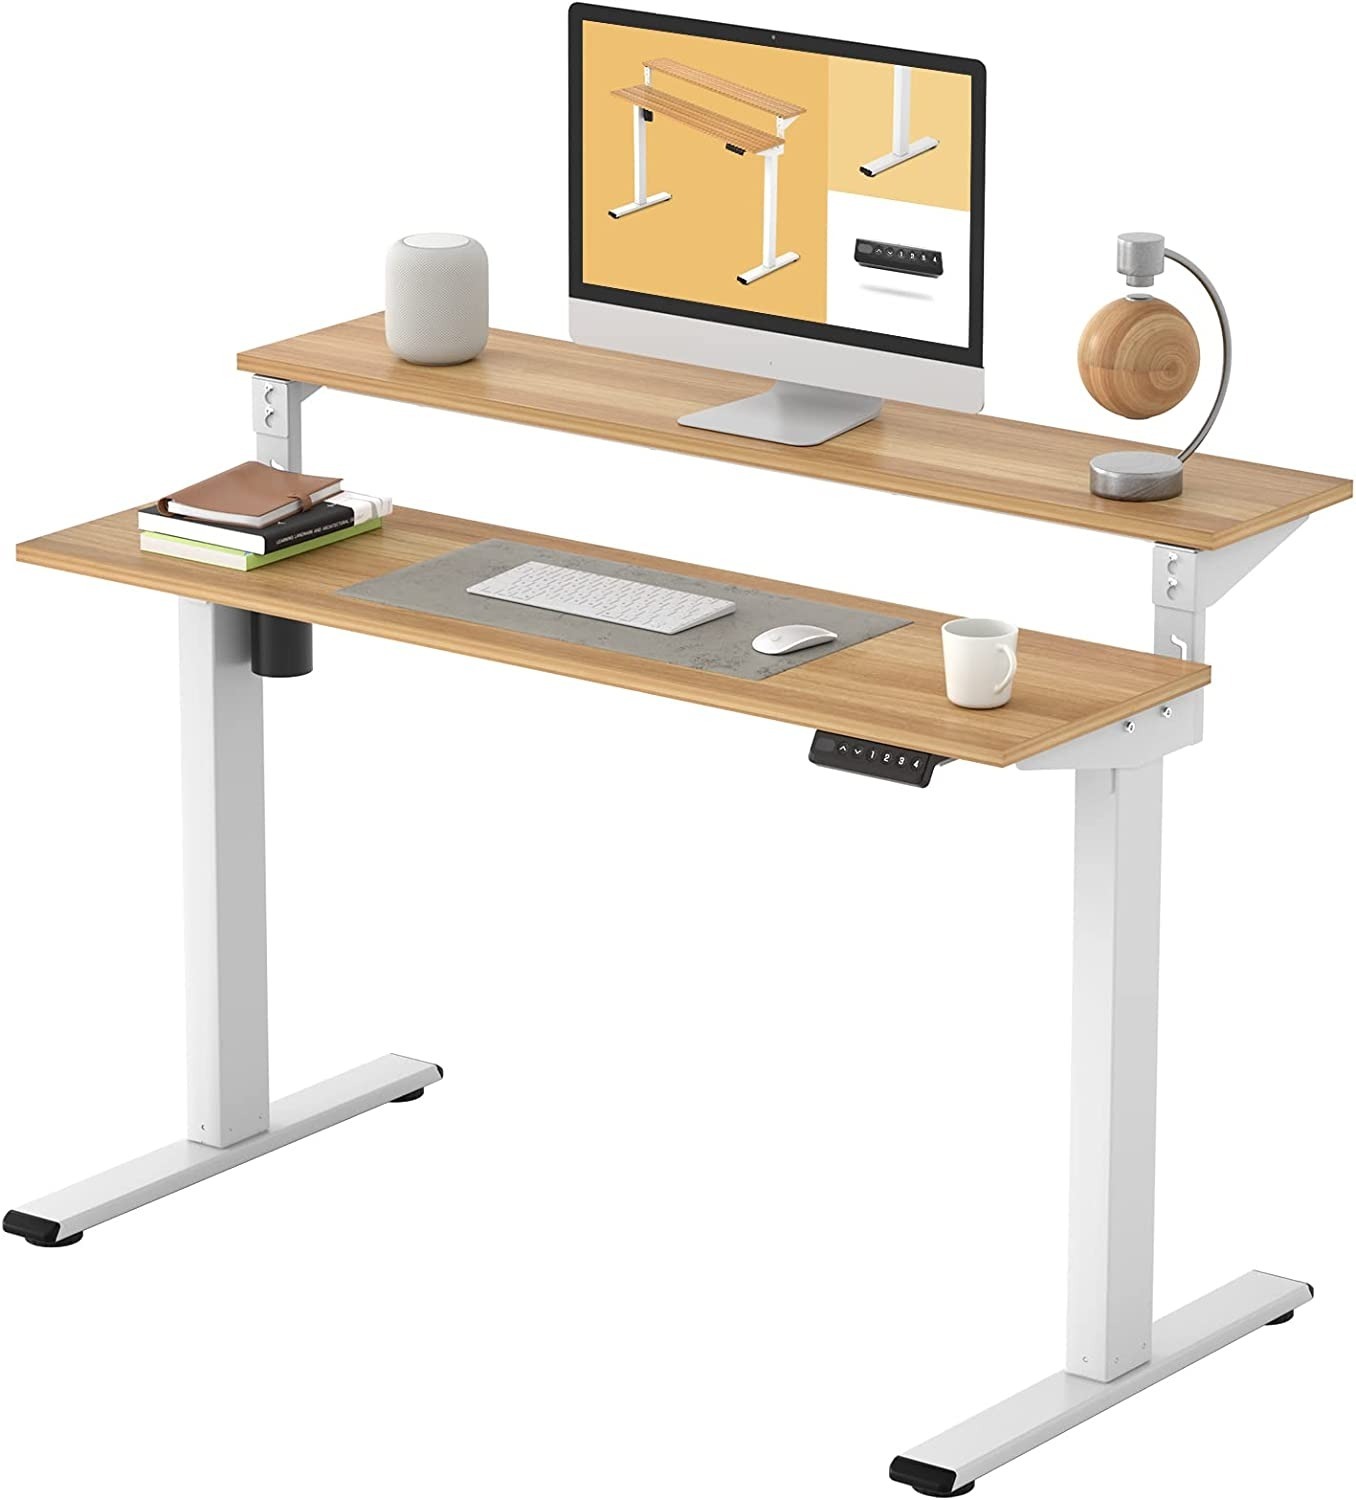 Prime Members: 48" x 24" FLEXISPOT EF1 2-Tier 4-Programmable Height Adjustable Electric Standing Desk $129.99 + Free Shipping